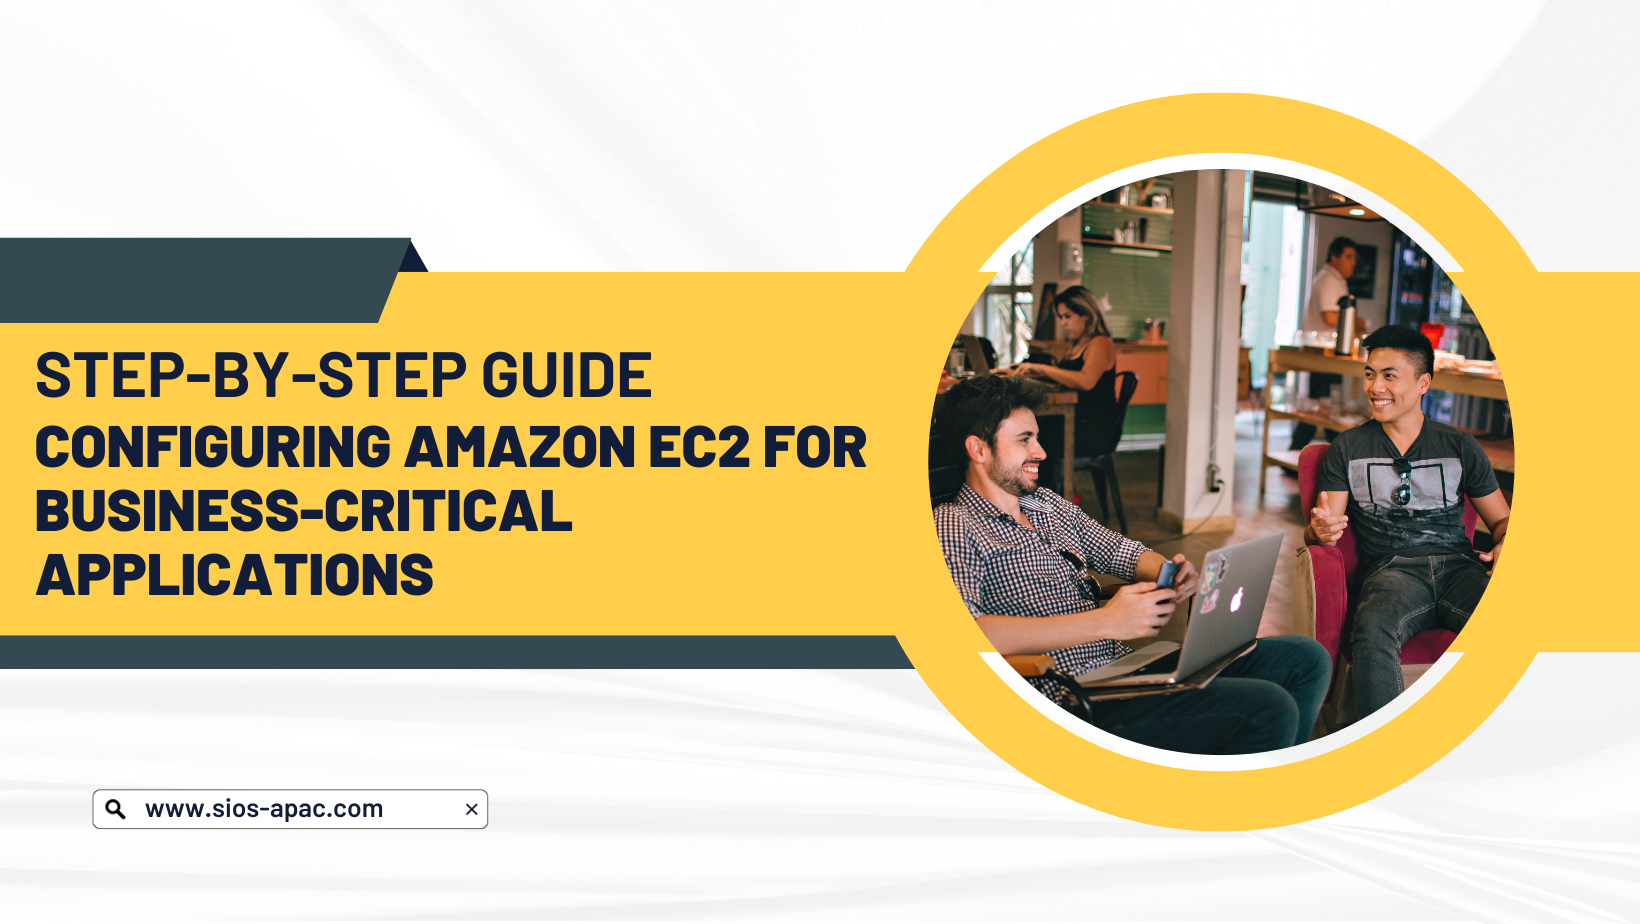 A Step-by-Step Guide to Configuring Amazon EC2 for Business-Critical Applications